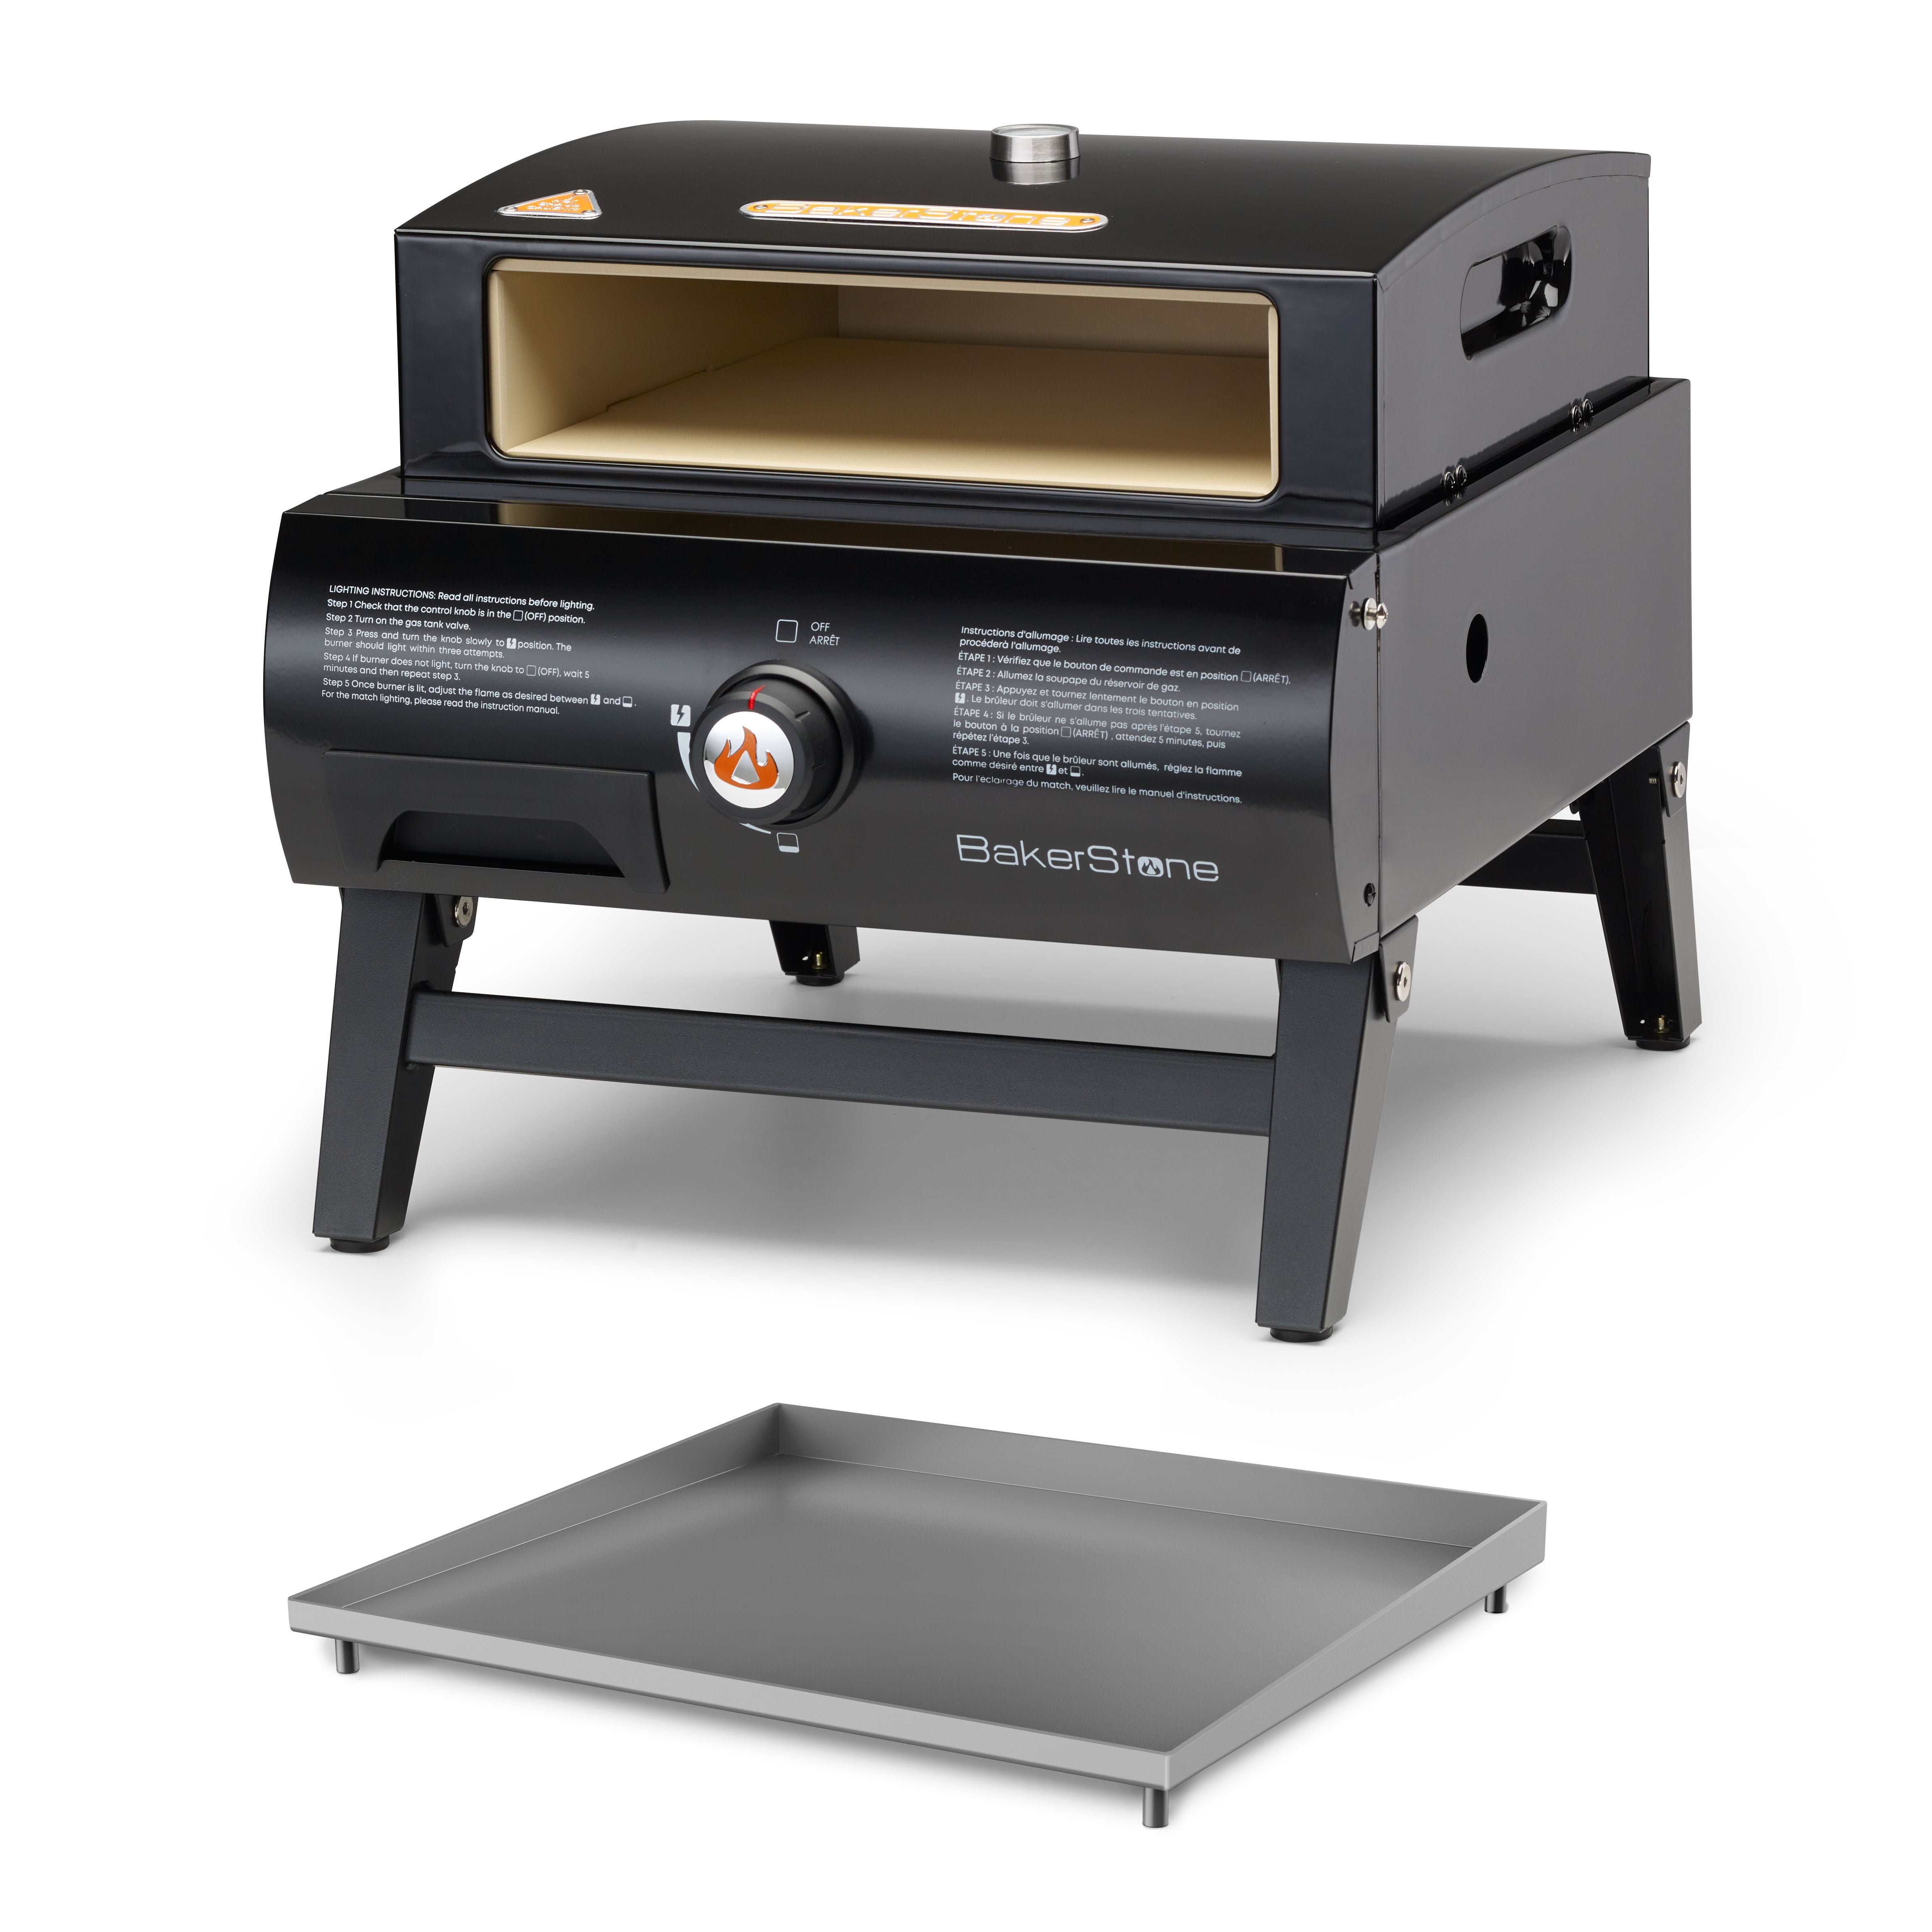 Portable Gas Pizza Oven, Bakerstone Outdoor Lp Gas Multi Function Cooking Center